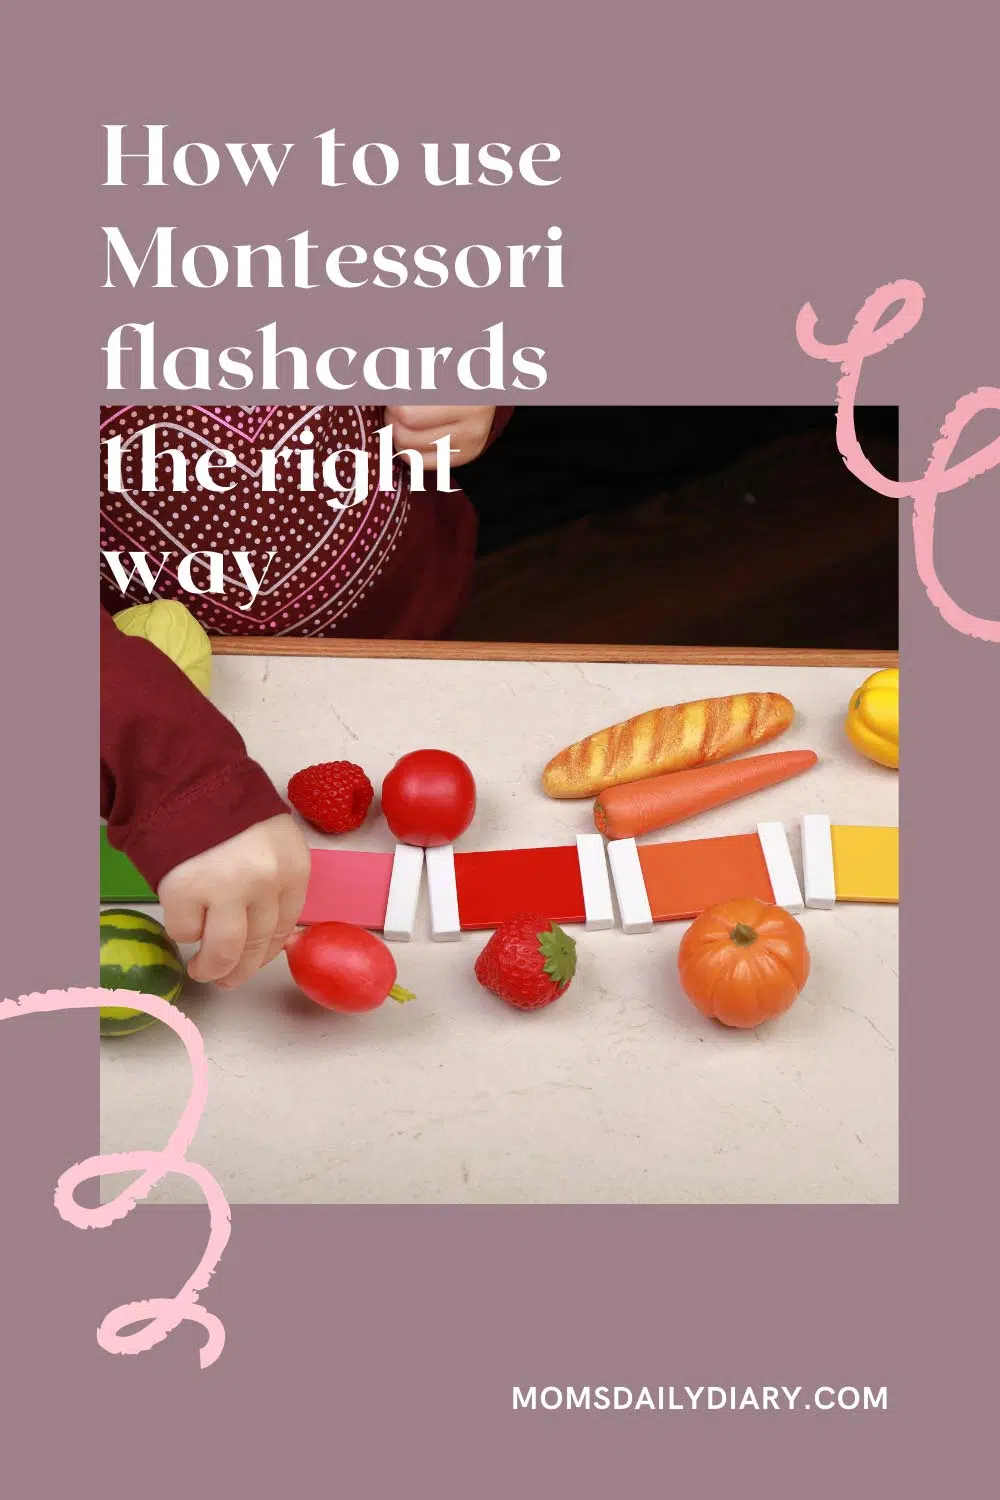 The best thing about Montessori flashcards is that they can be used in tons of different ways. Here's how to introduce them to your child.